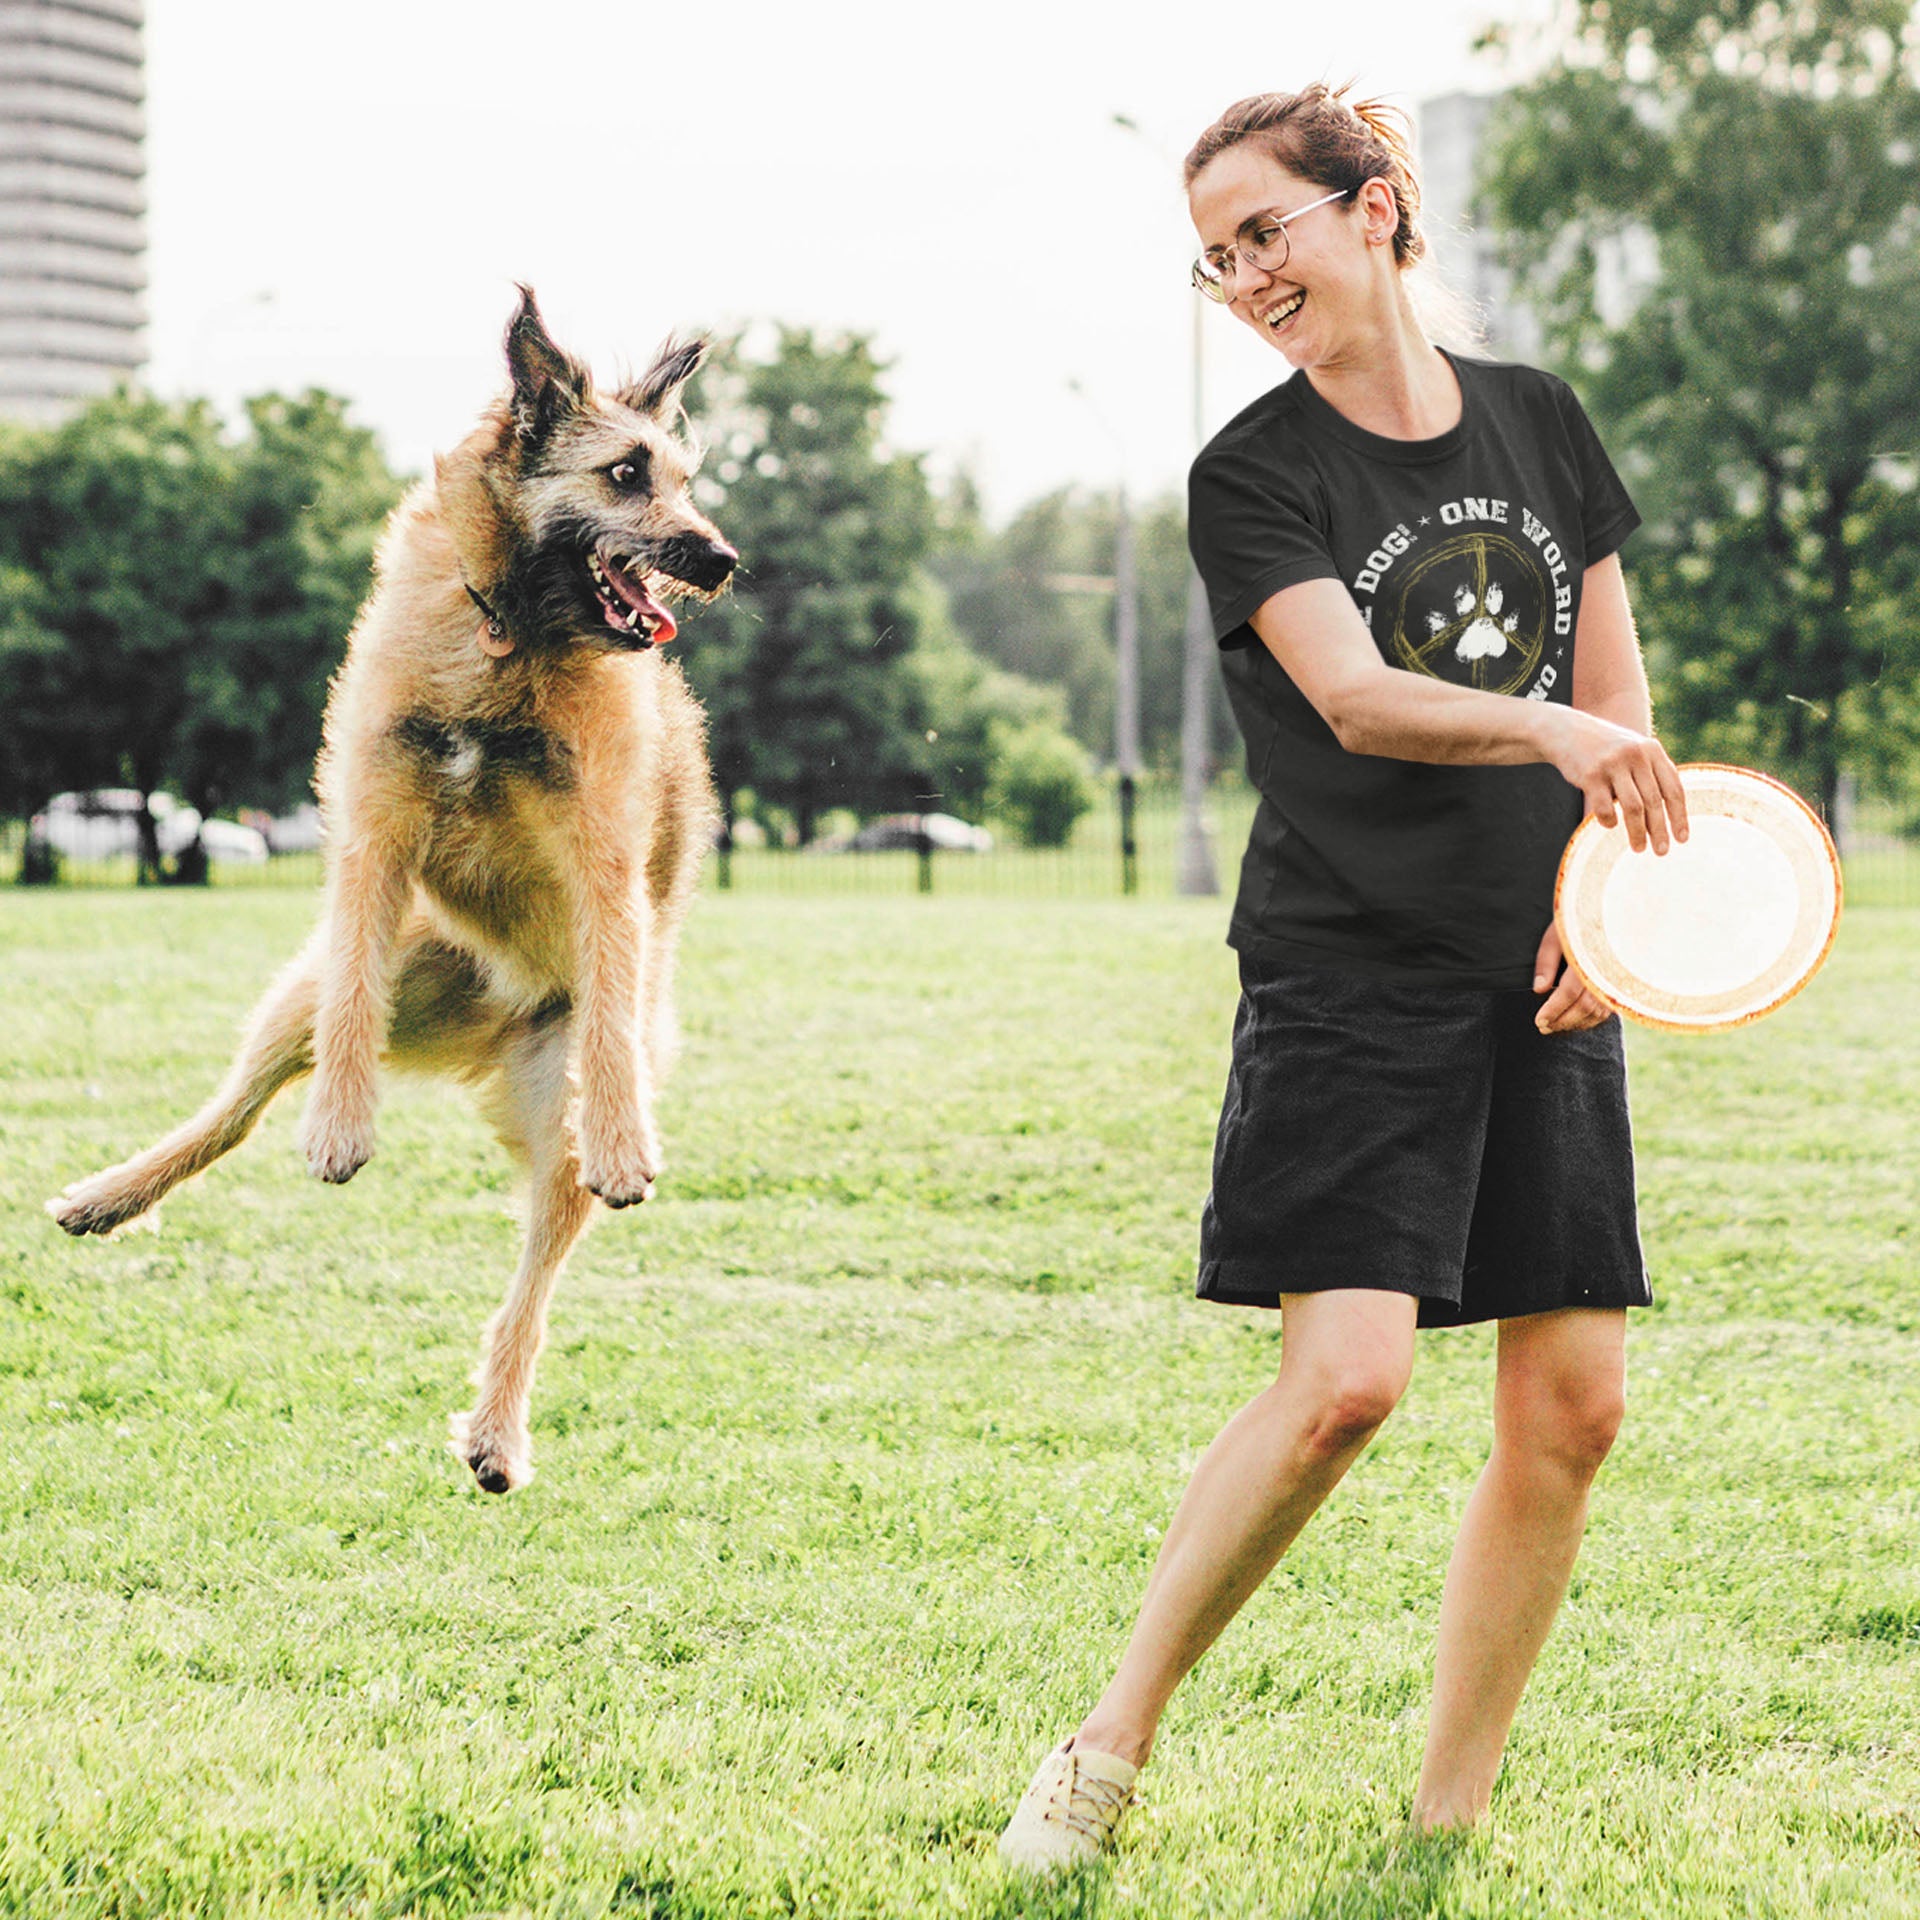 In a park, a woman, dressed in a Dogs Pure Love, 'One World - One Dog' unisex dog t shirt, prepares to throw a frisbee to her dog, who eagerly jumps up to catch it.